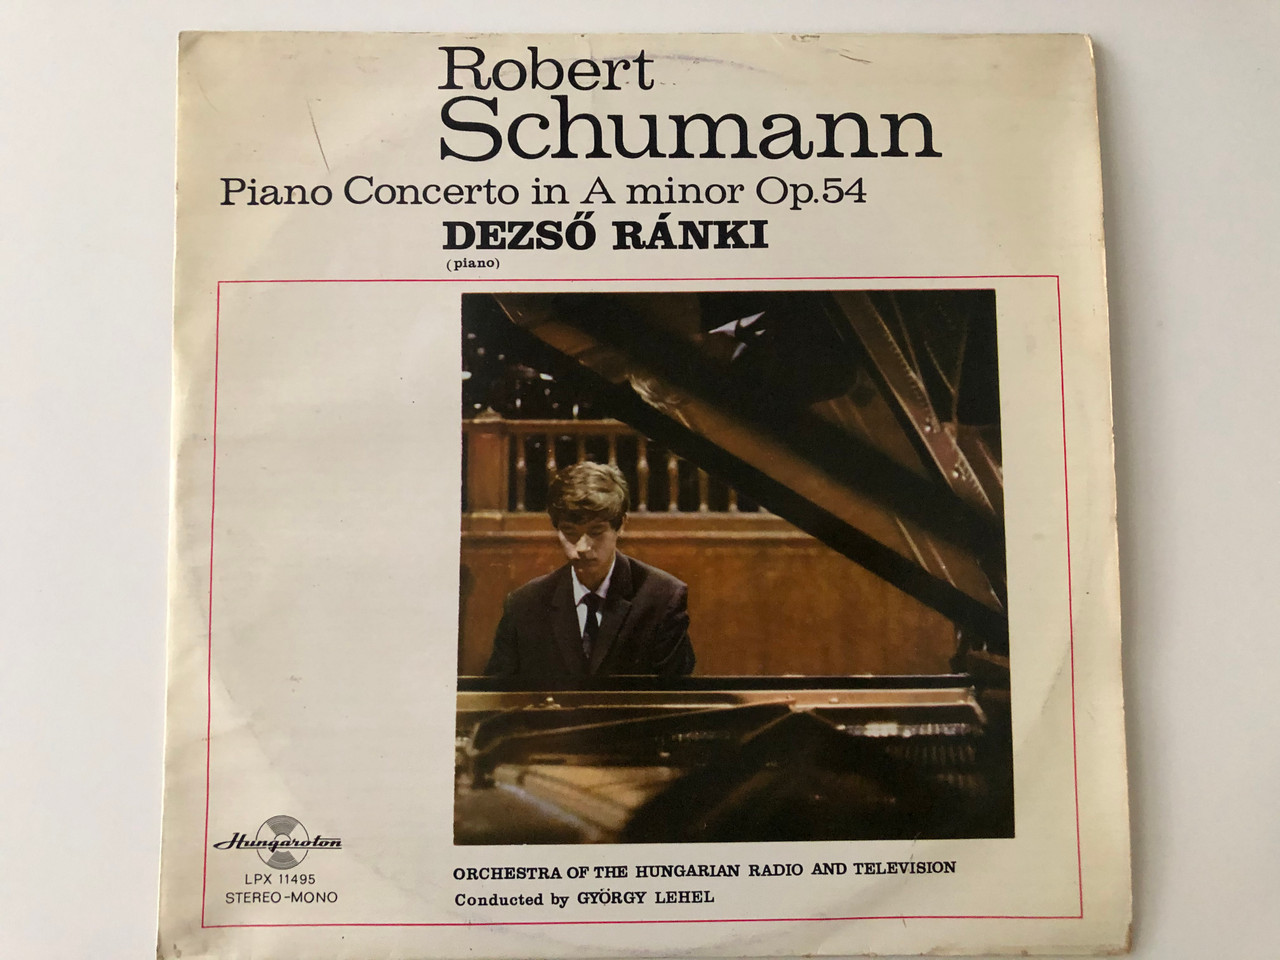 https://cdn10.bigcommerce.com/s-62bdpkt7pb/products/30002/images/178186/Robert_Schumann_Piano_Concerto_In_A_Minor_Op._54_Dezs_Rnki_piano_Orchestra_Of_The_Hungarian_Radio_And_Television_Conducted_by_Gyrgy_Lehel_Hungaroton_LP_Stereo_Mono_LPX_11495_1__08859.1620927177.1280.1280.JPG?c=2&_ga=2.56479915.1294282105.1620933183-96777119.1620933183